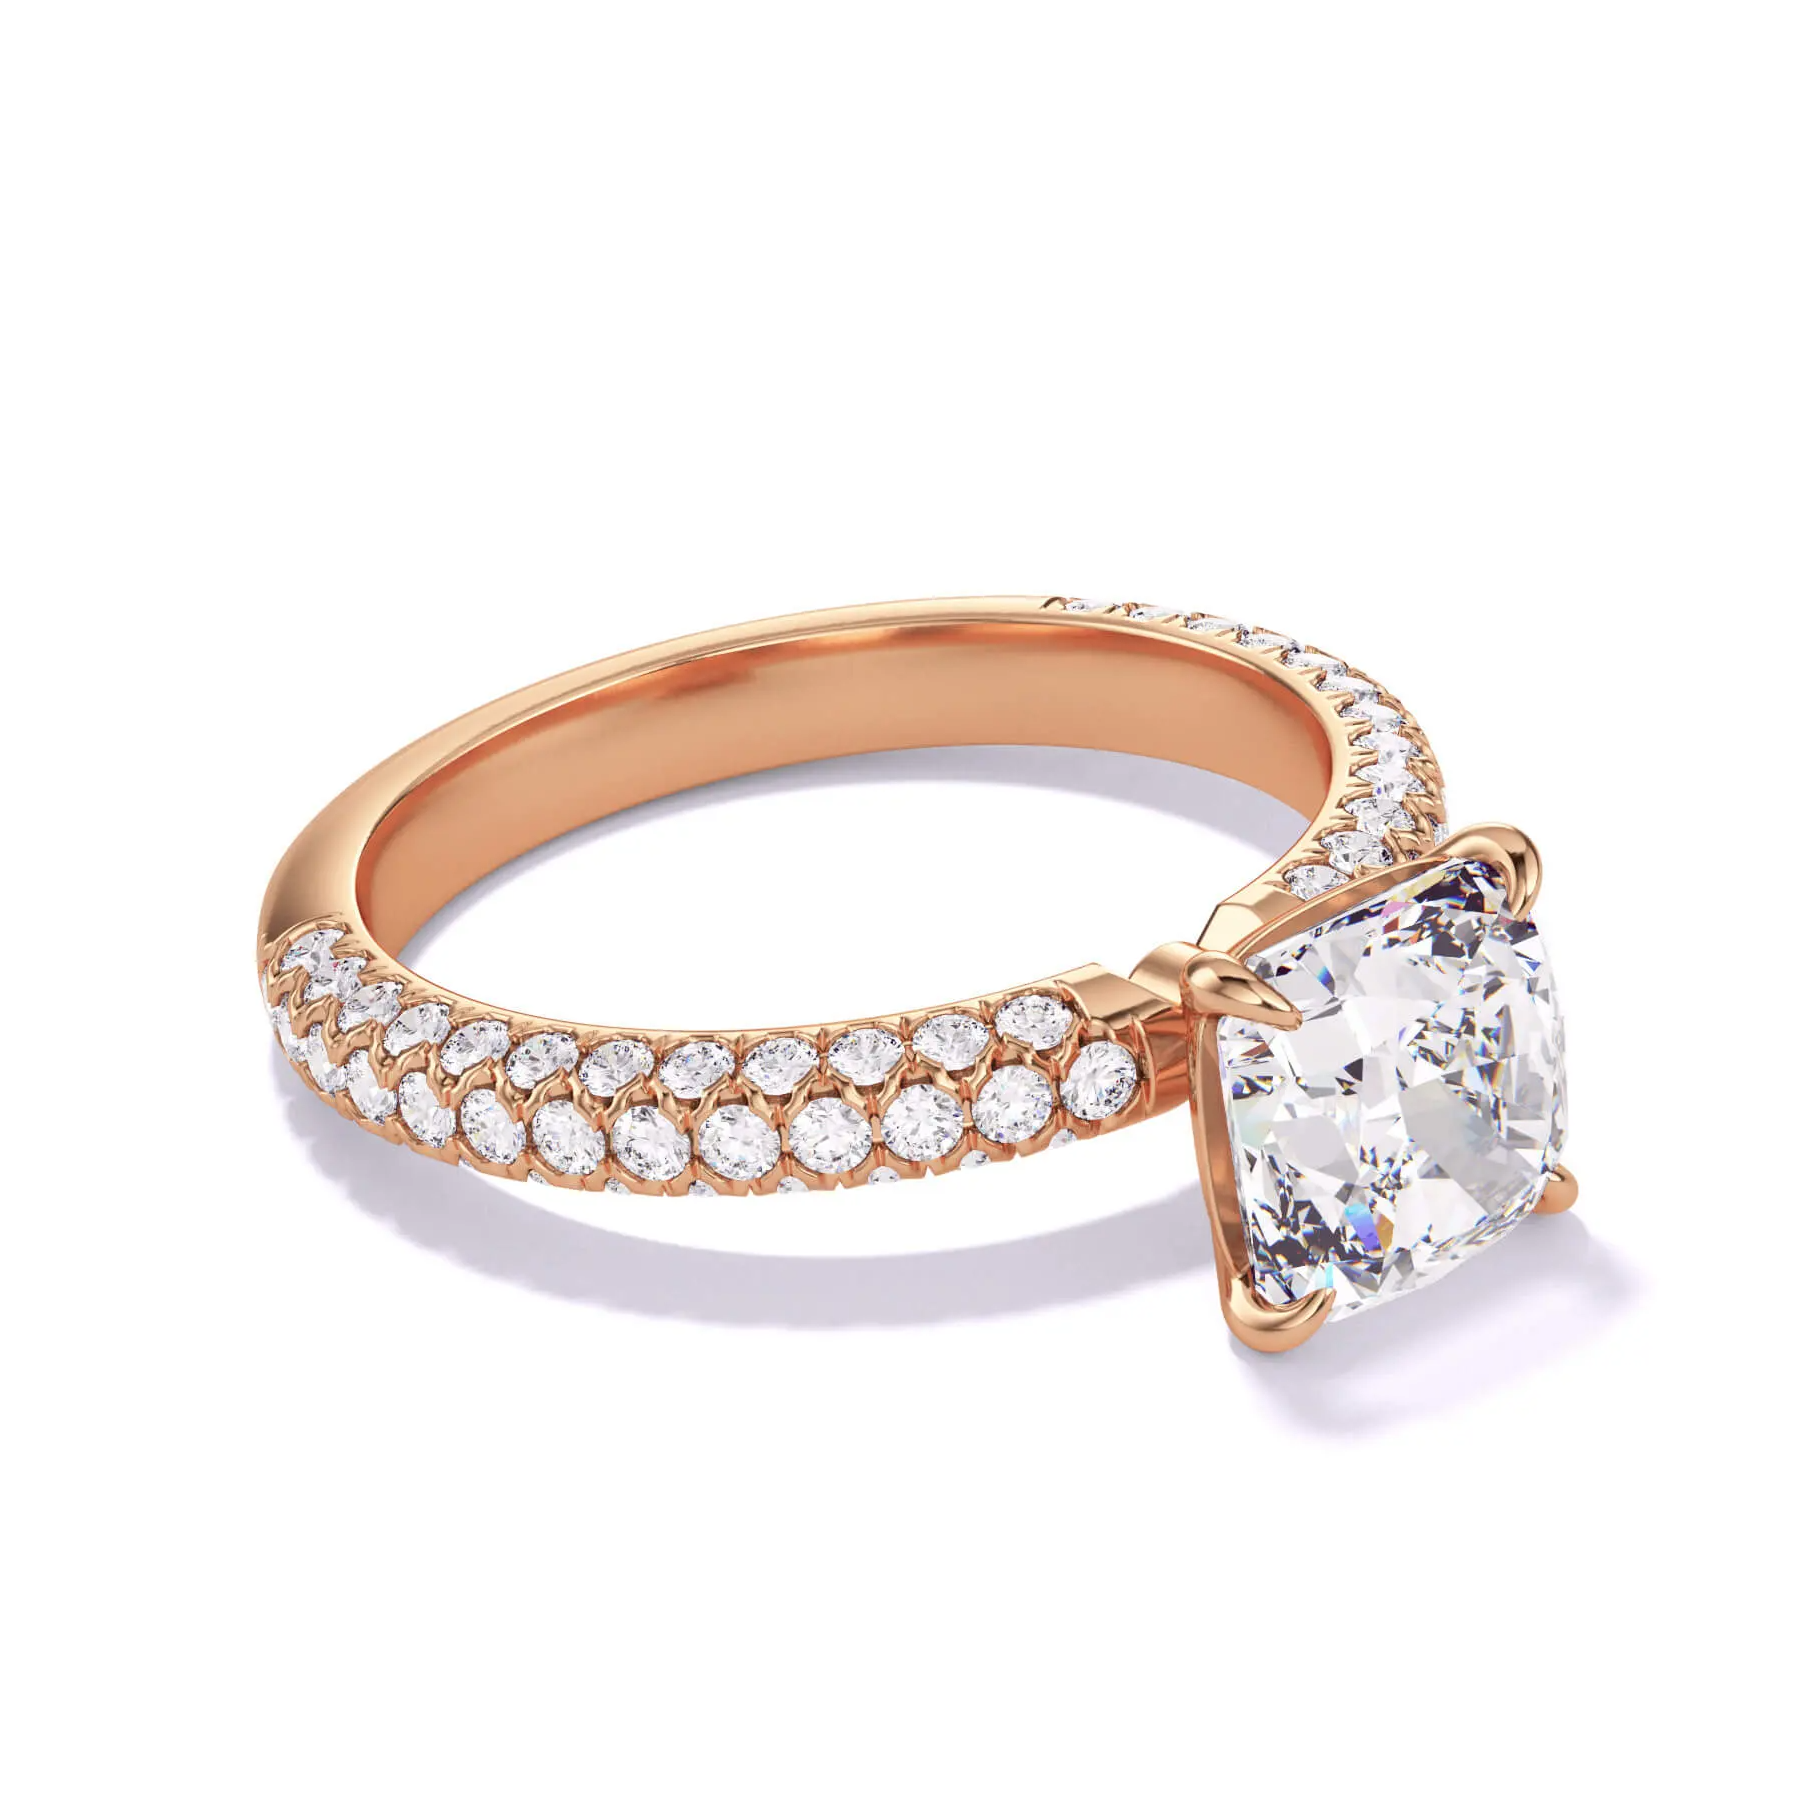 $10,000 diamond engagement ring - cushion cut on a three row pave band in rose gold